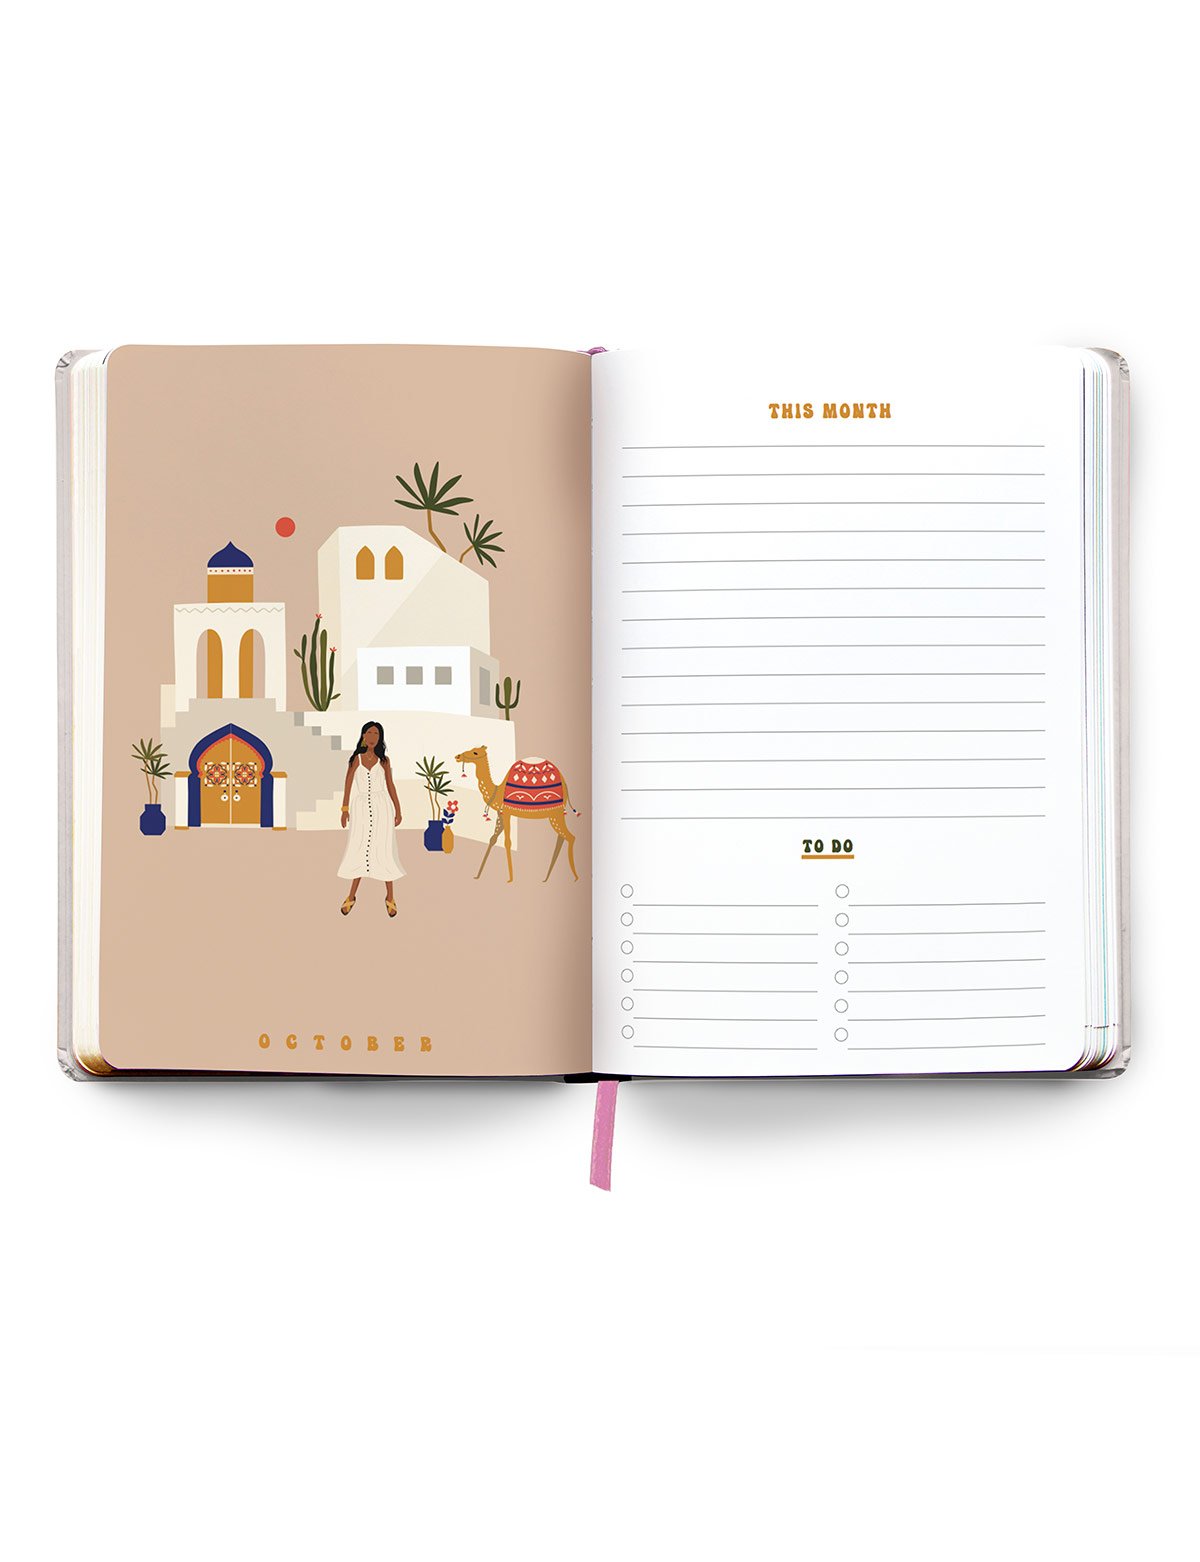 Just A Girl Boss Building Her Empire 2021 Agenda - Monthly Planner